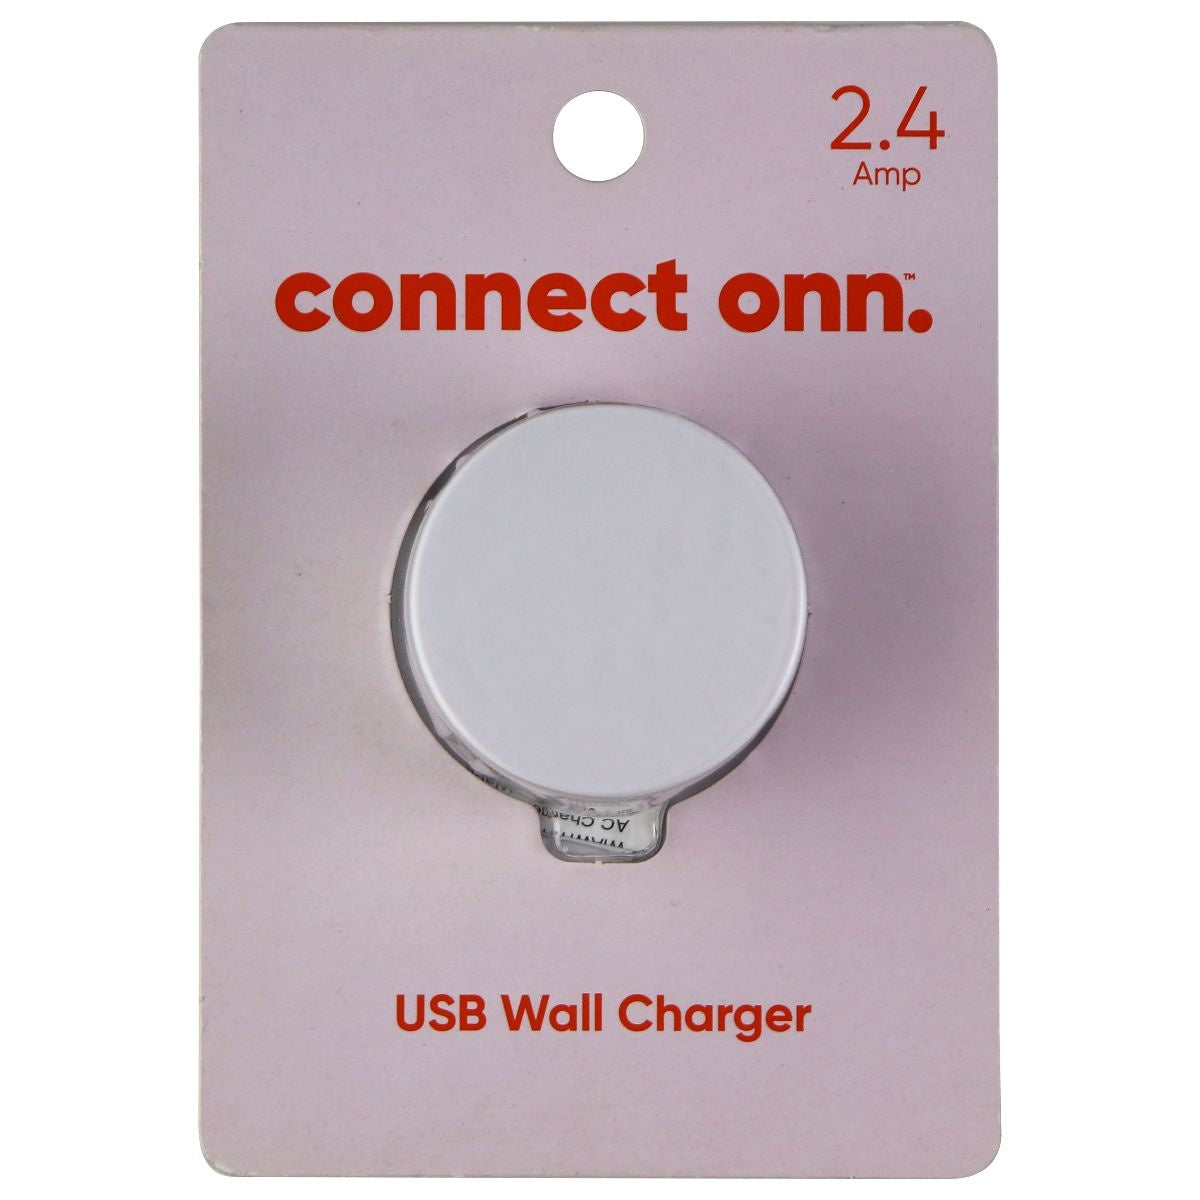 onn. 2.4A USB Wall Charger, Black, Travel friendly plug folds for  easy,Simply plug your USB device into our USB Charger